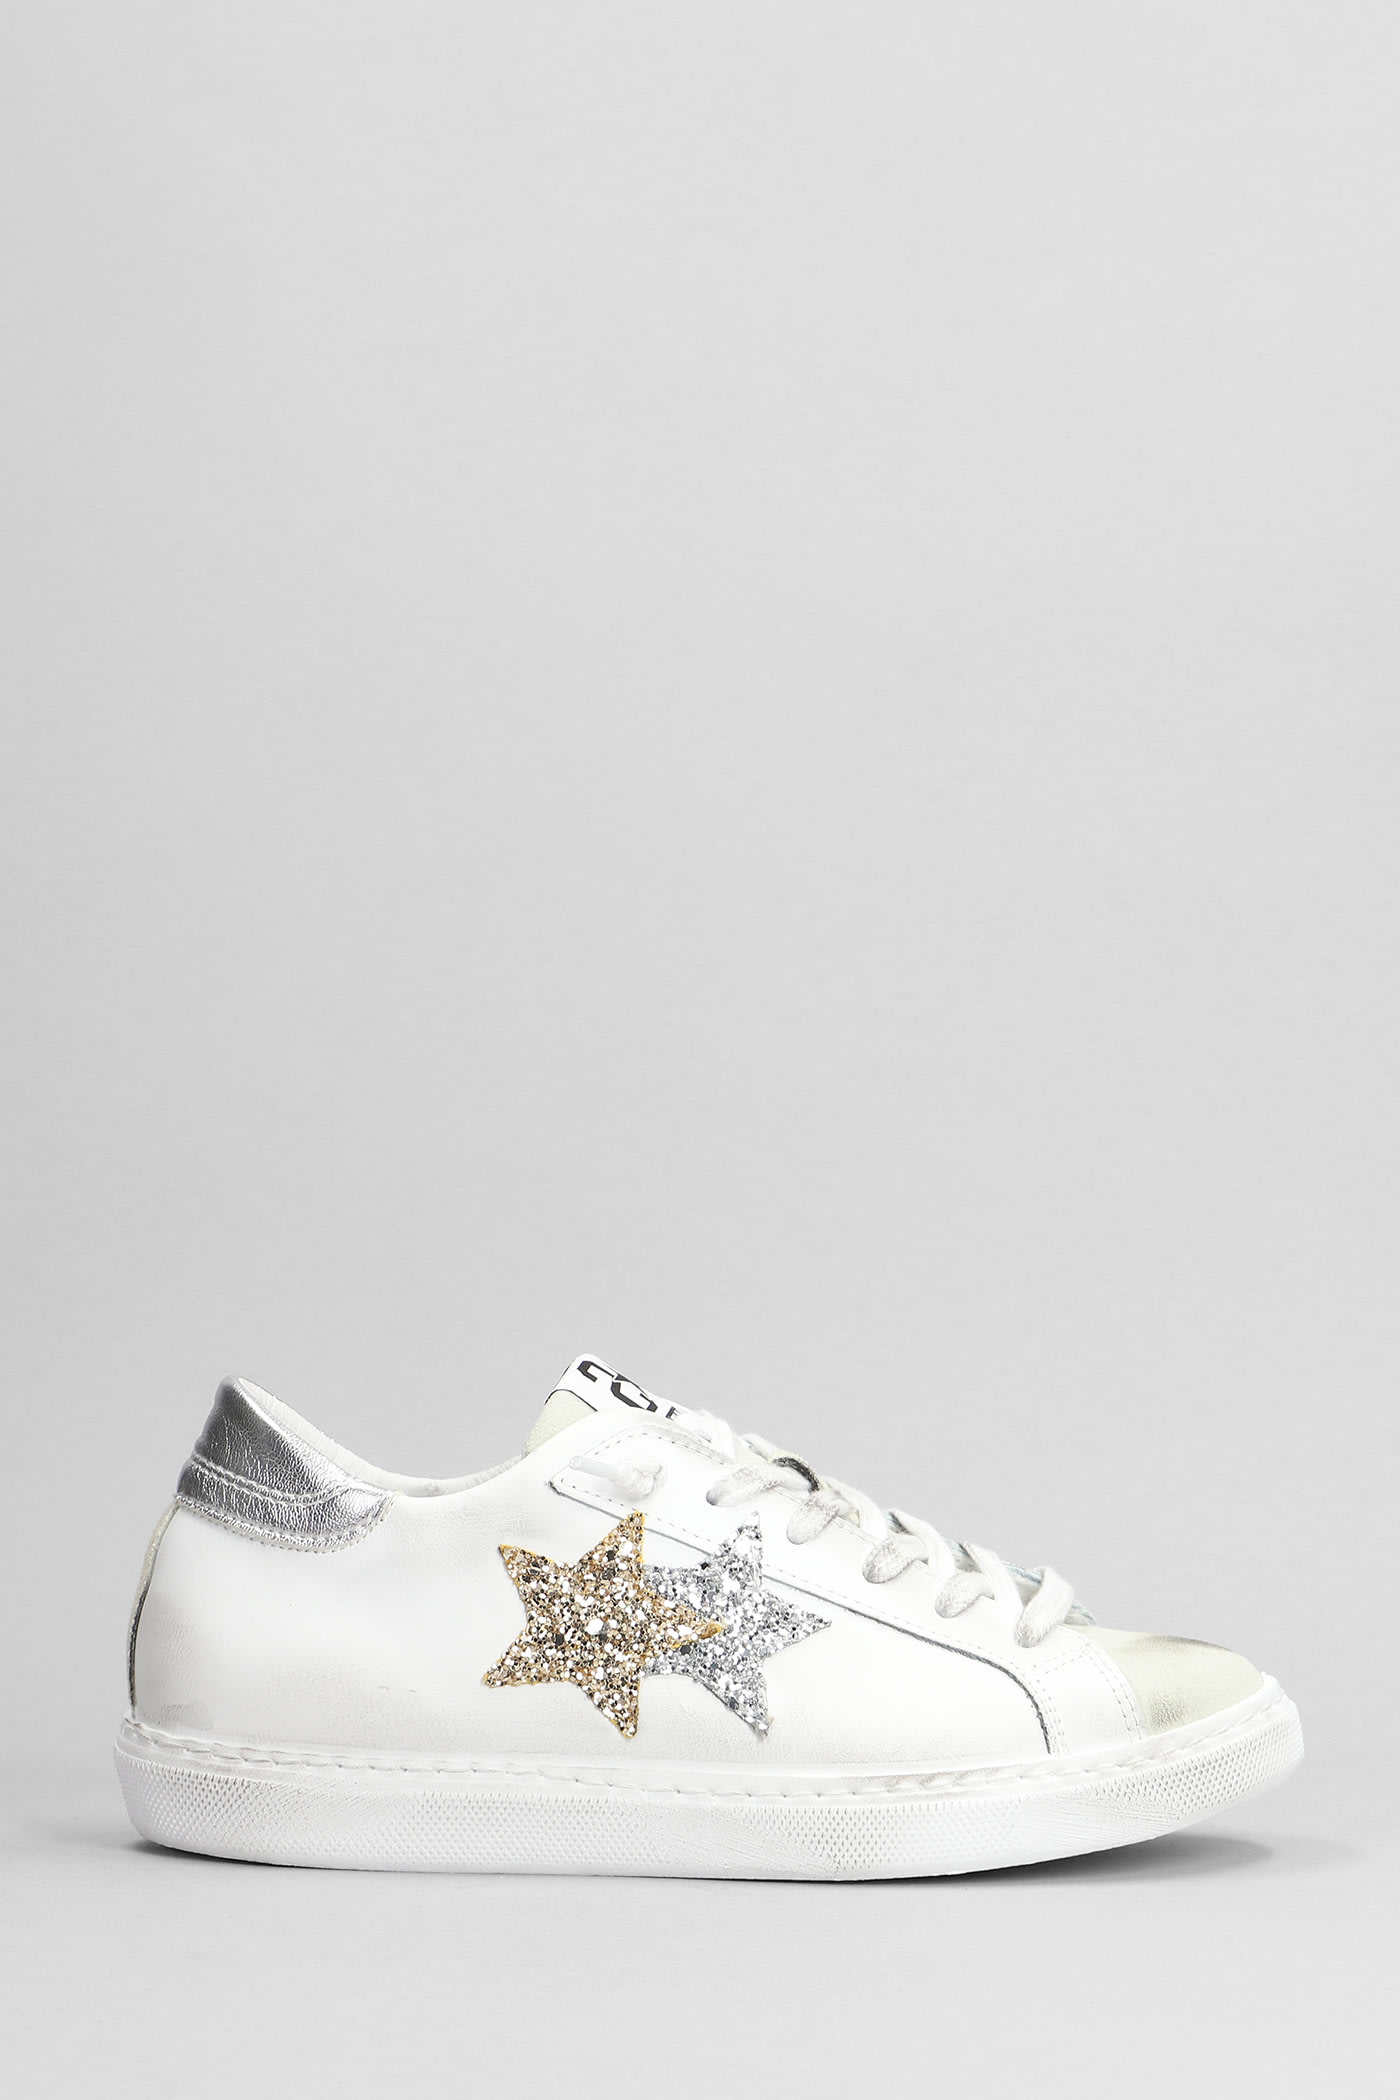 Shop 2star Sneakers In White Suede And Leather